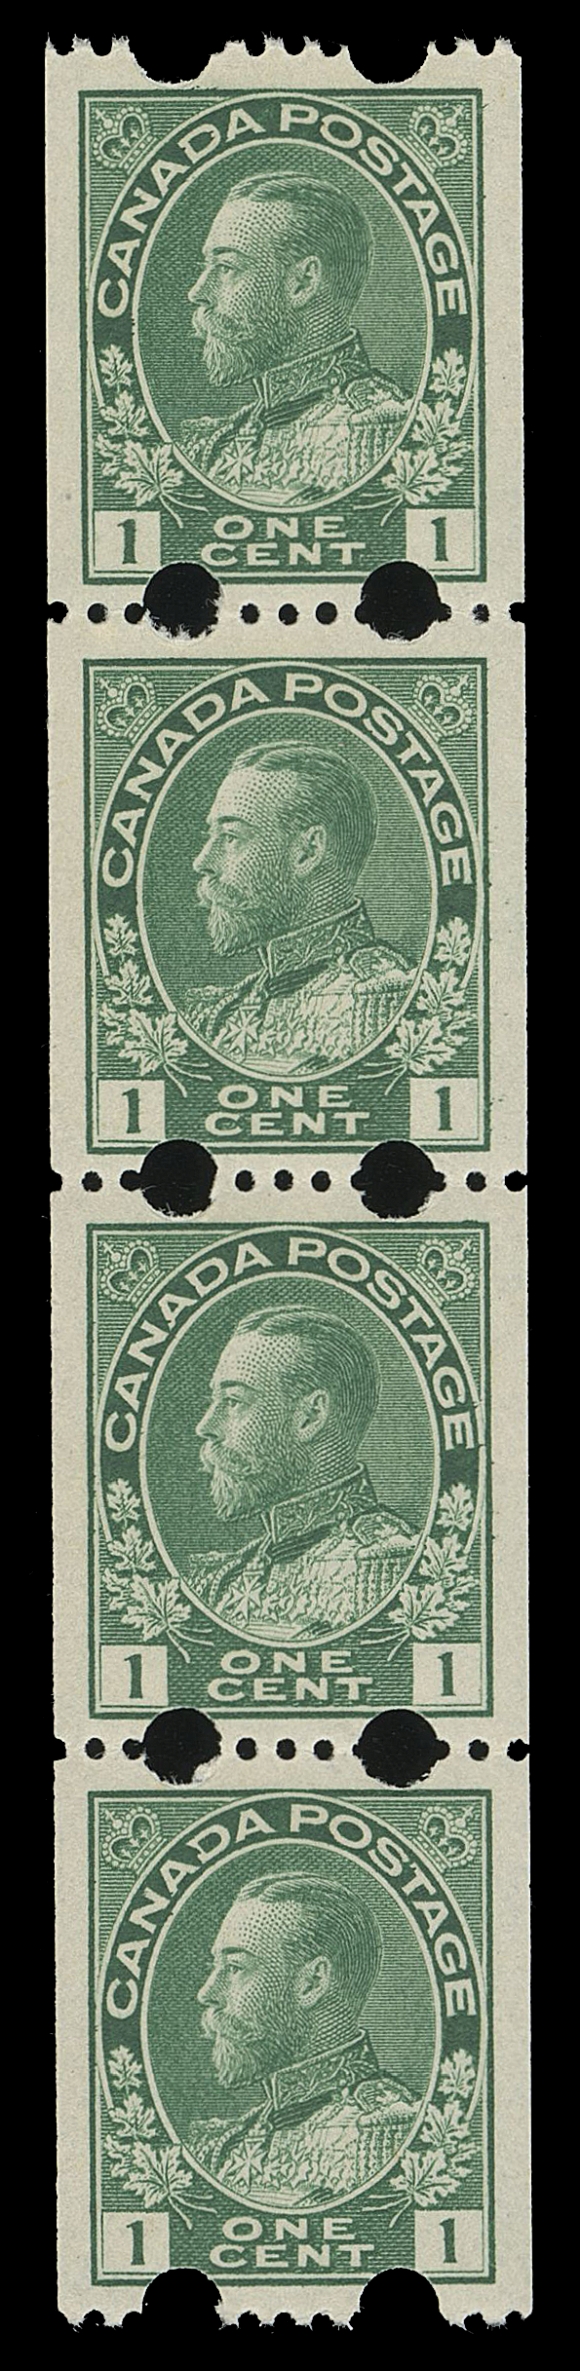 CANADA -  8 KING GEORGE V  131iv,Experimental Toronto coil; a post office fresh and very well centered mint strip of four with full immaculate original gum. As nice as the day it was printed, XF NH